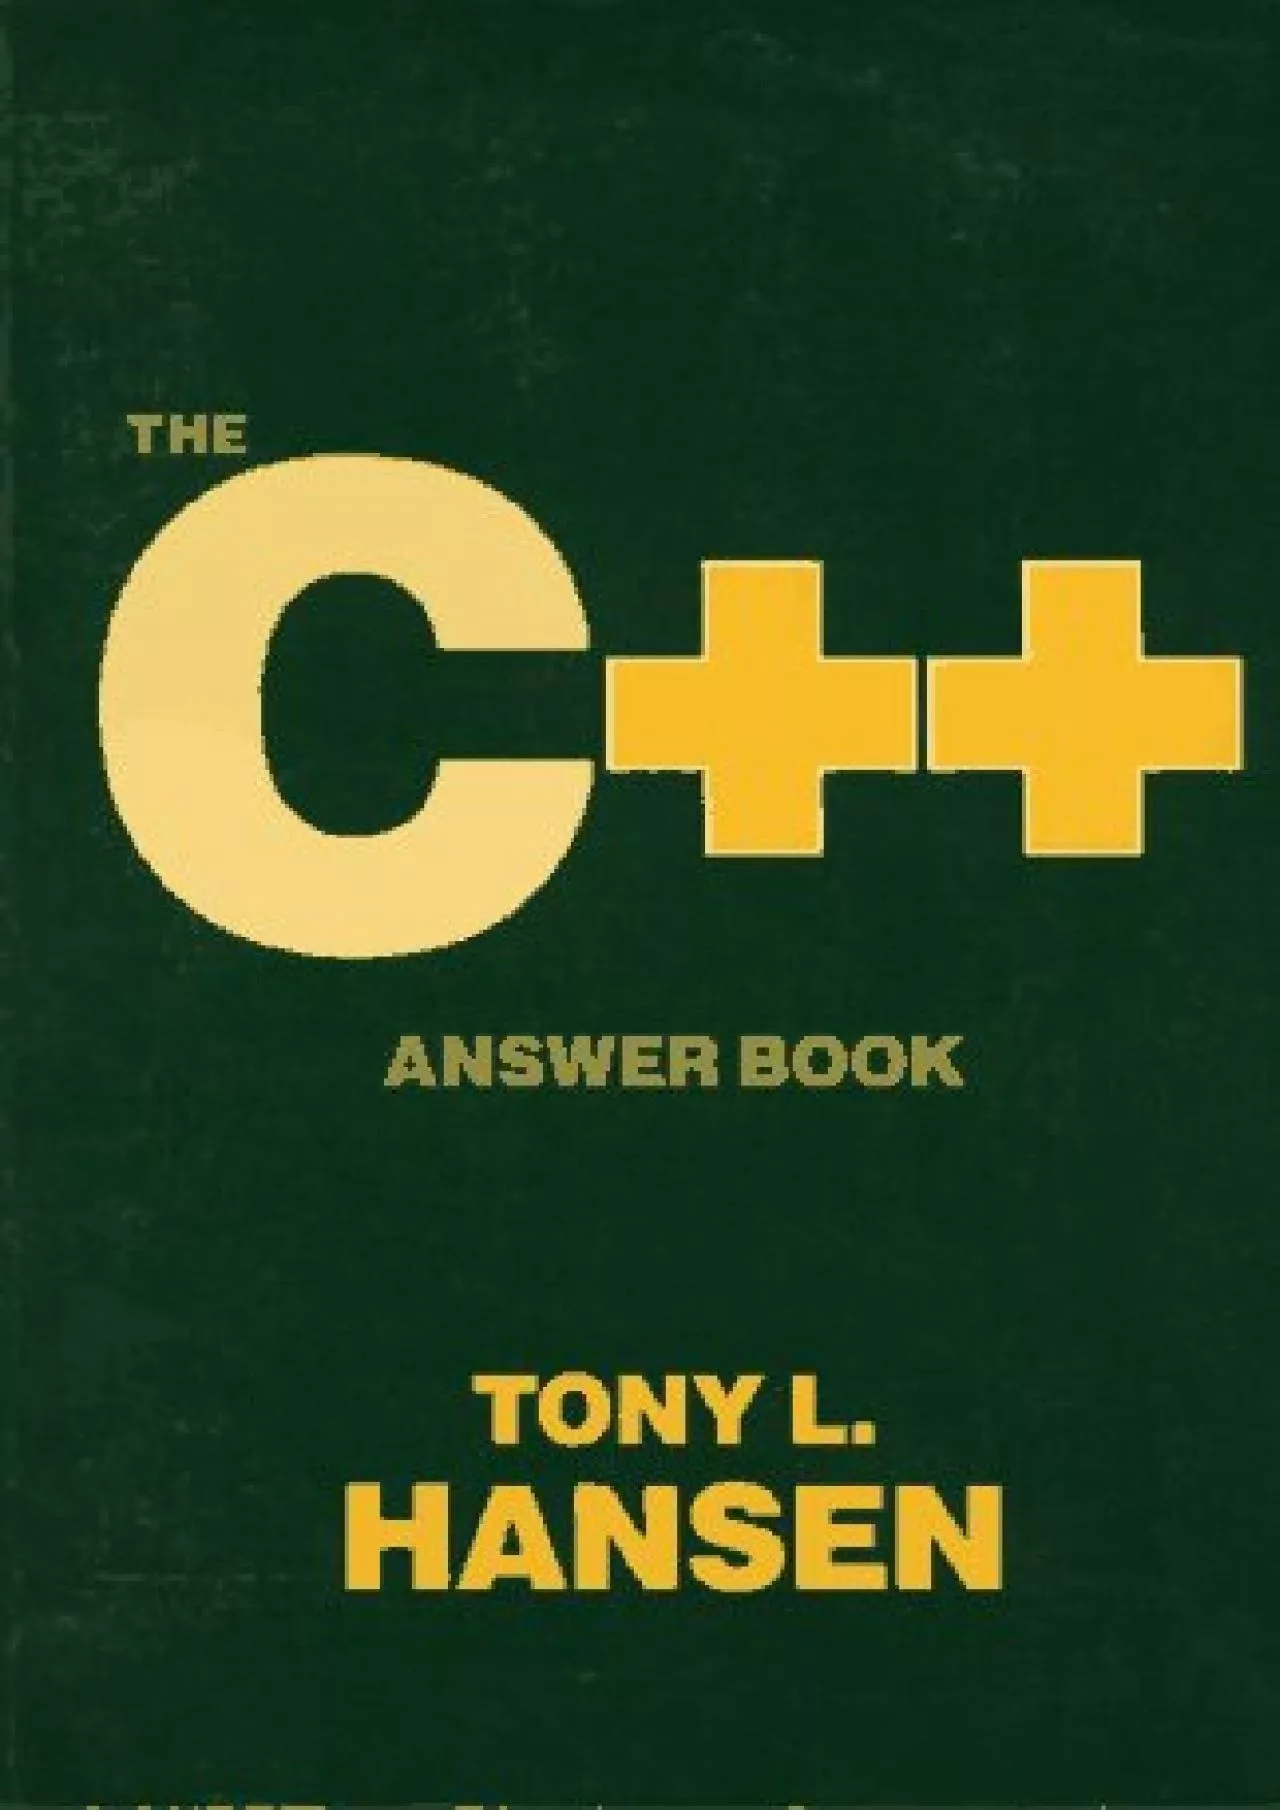 [READING BOOK]-The C++ Answer Book